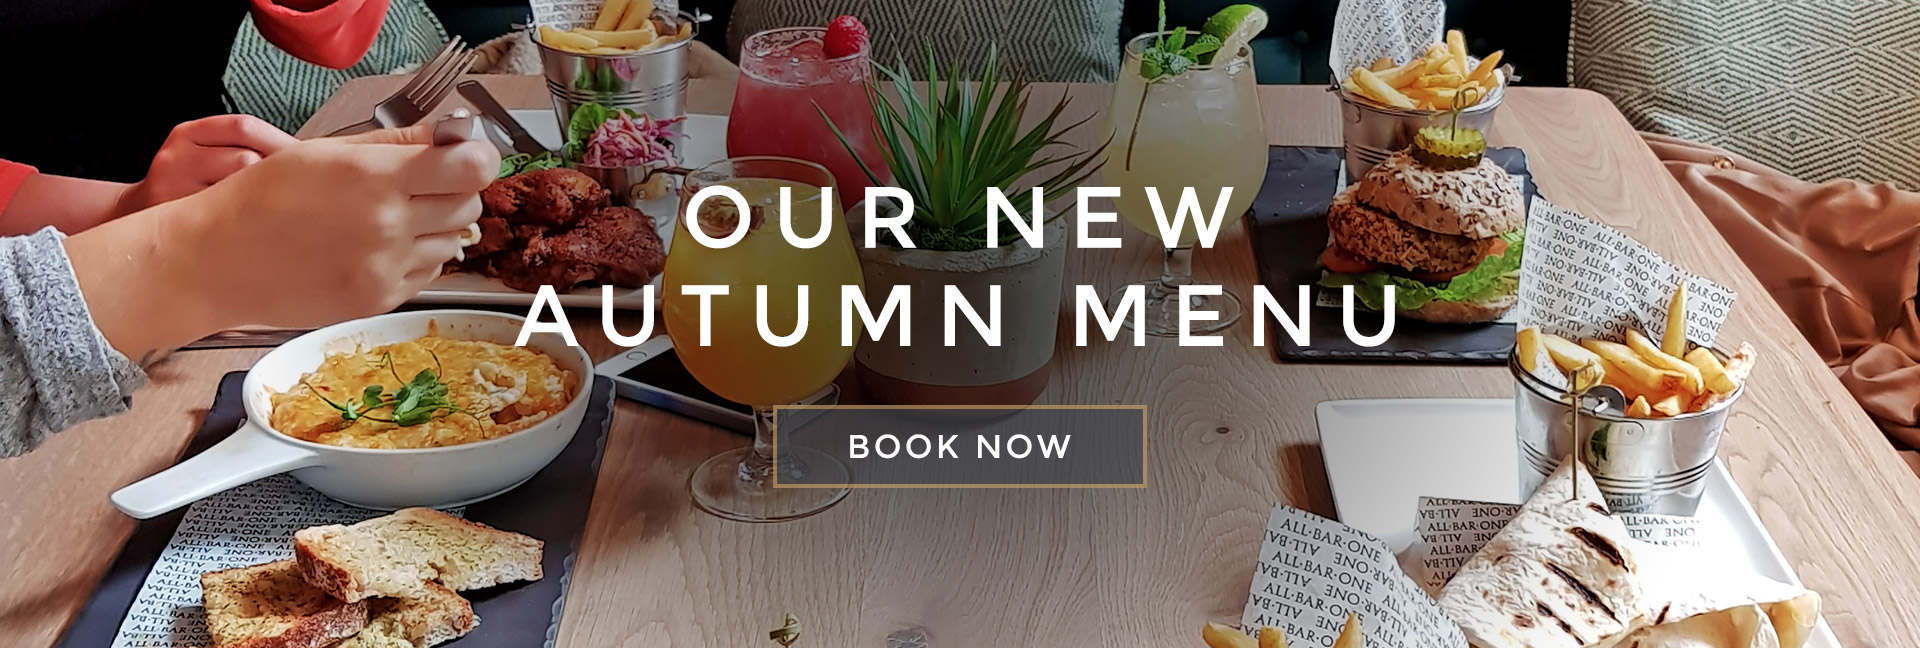 Our new Autumn menu at All Bar One Brindleyplace - Book now